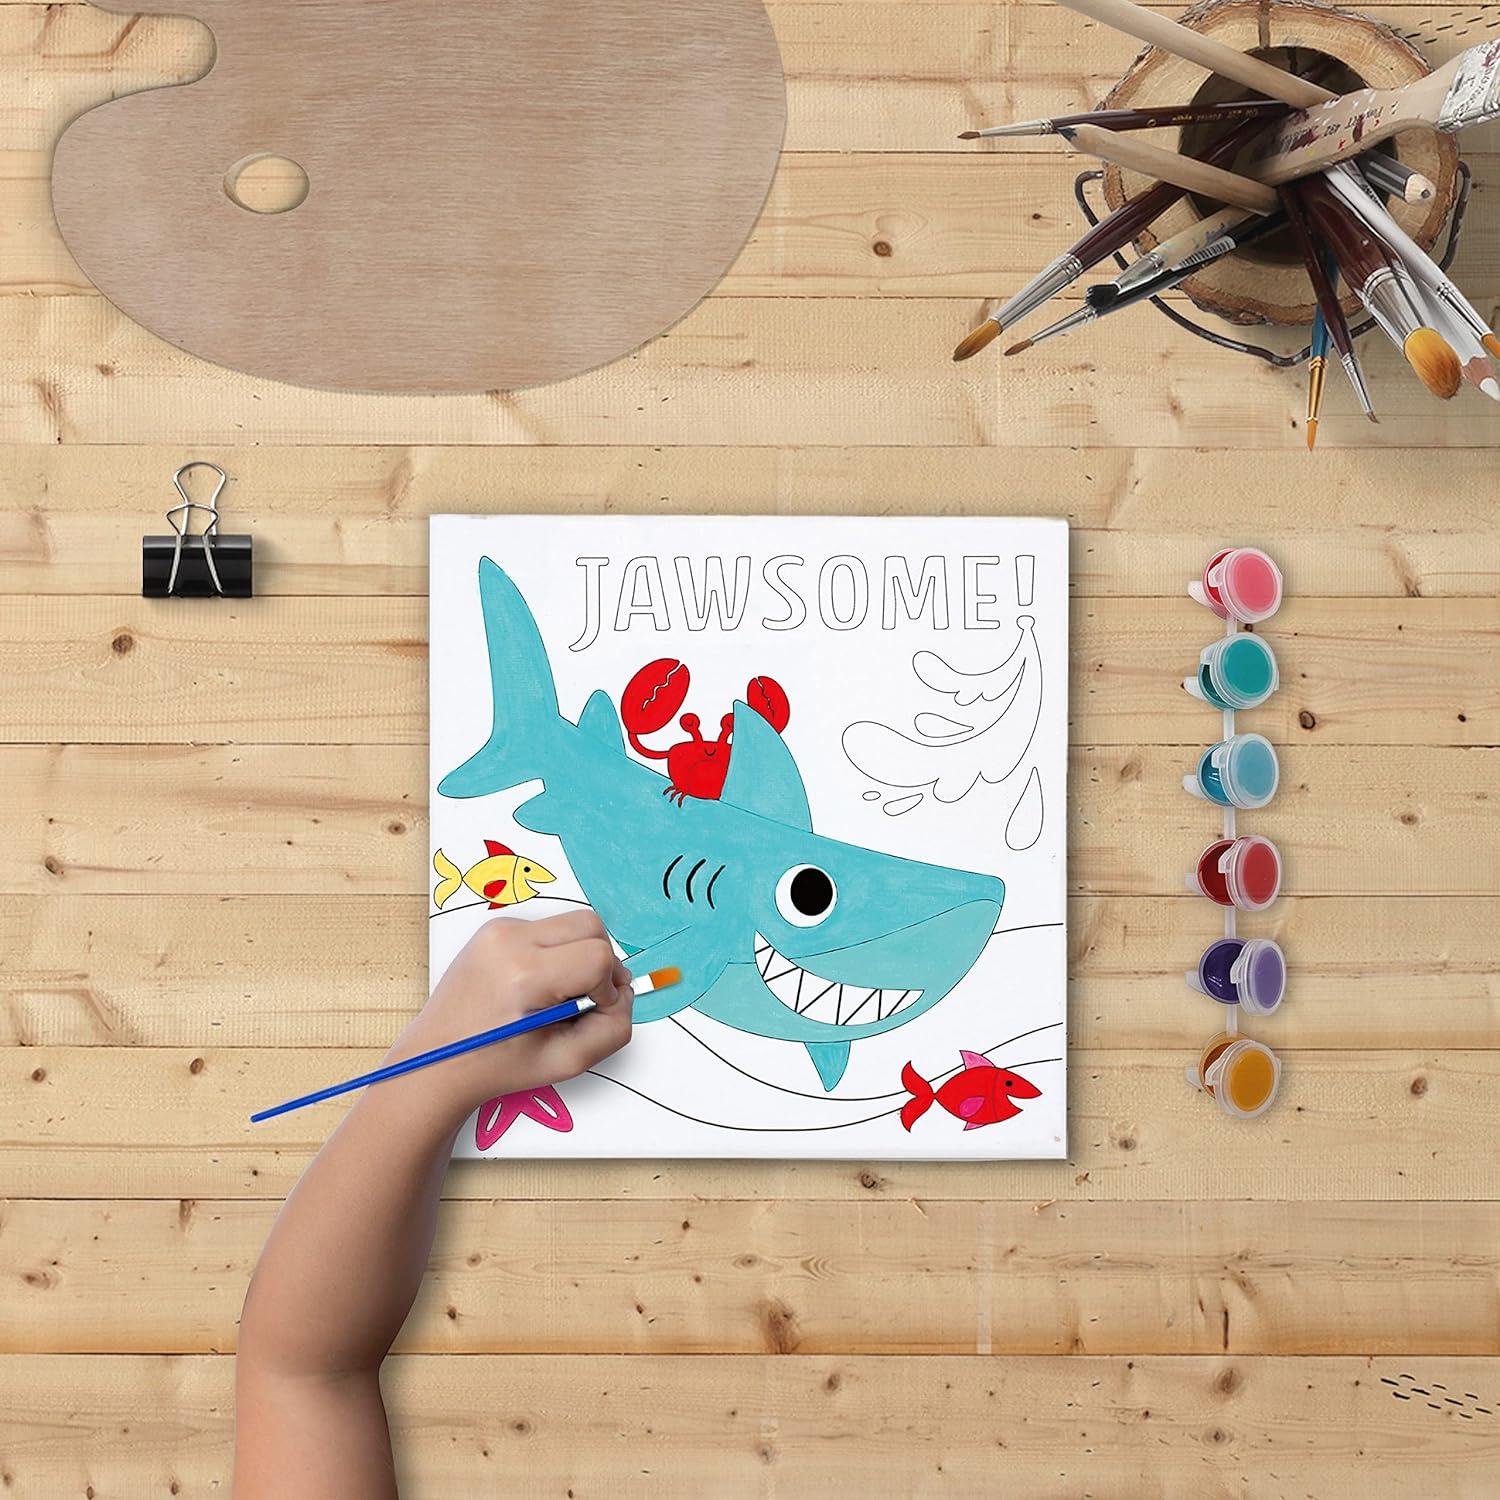 Baby Shark Mosaic Sticker Art Kits for Kids - Create Your Own Mosaic Pictures - Includes 9 Boards & 9 Sticker Sheets - Educational Arts & Crafts